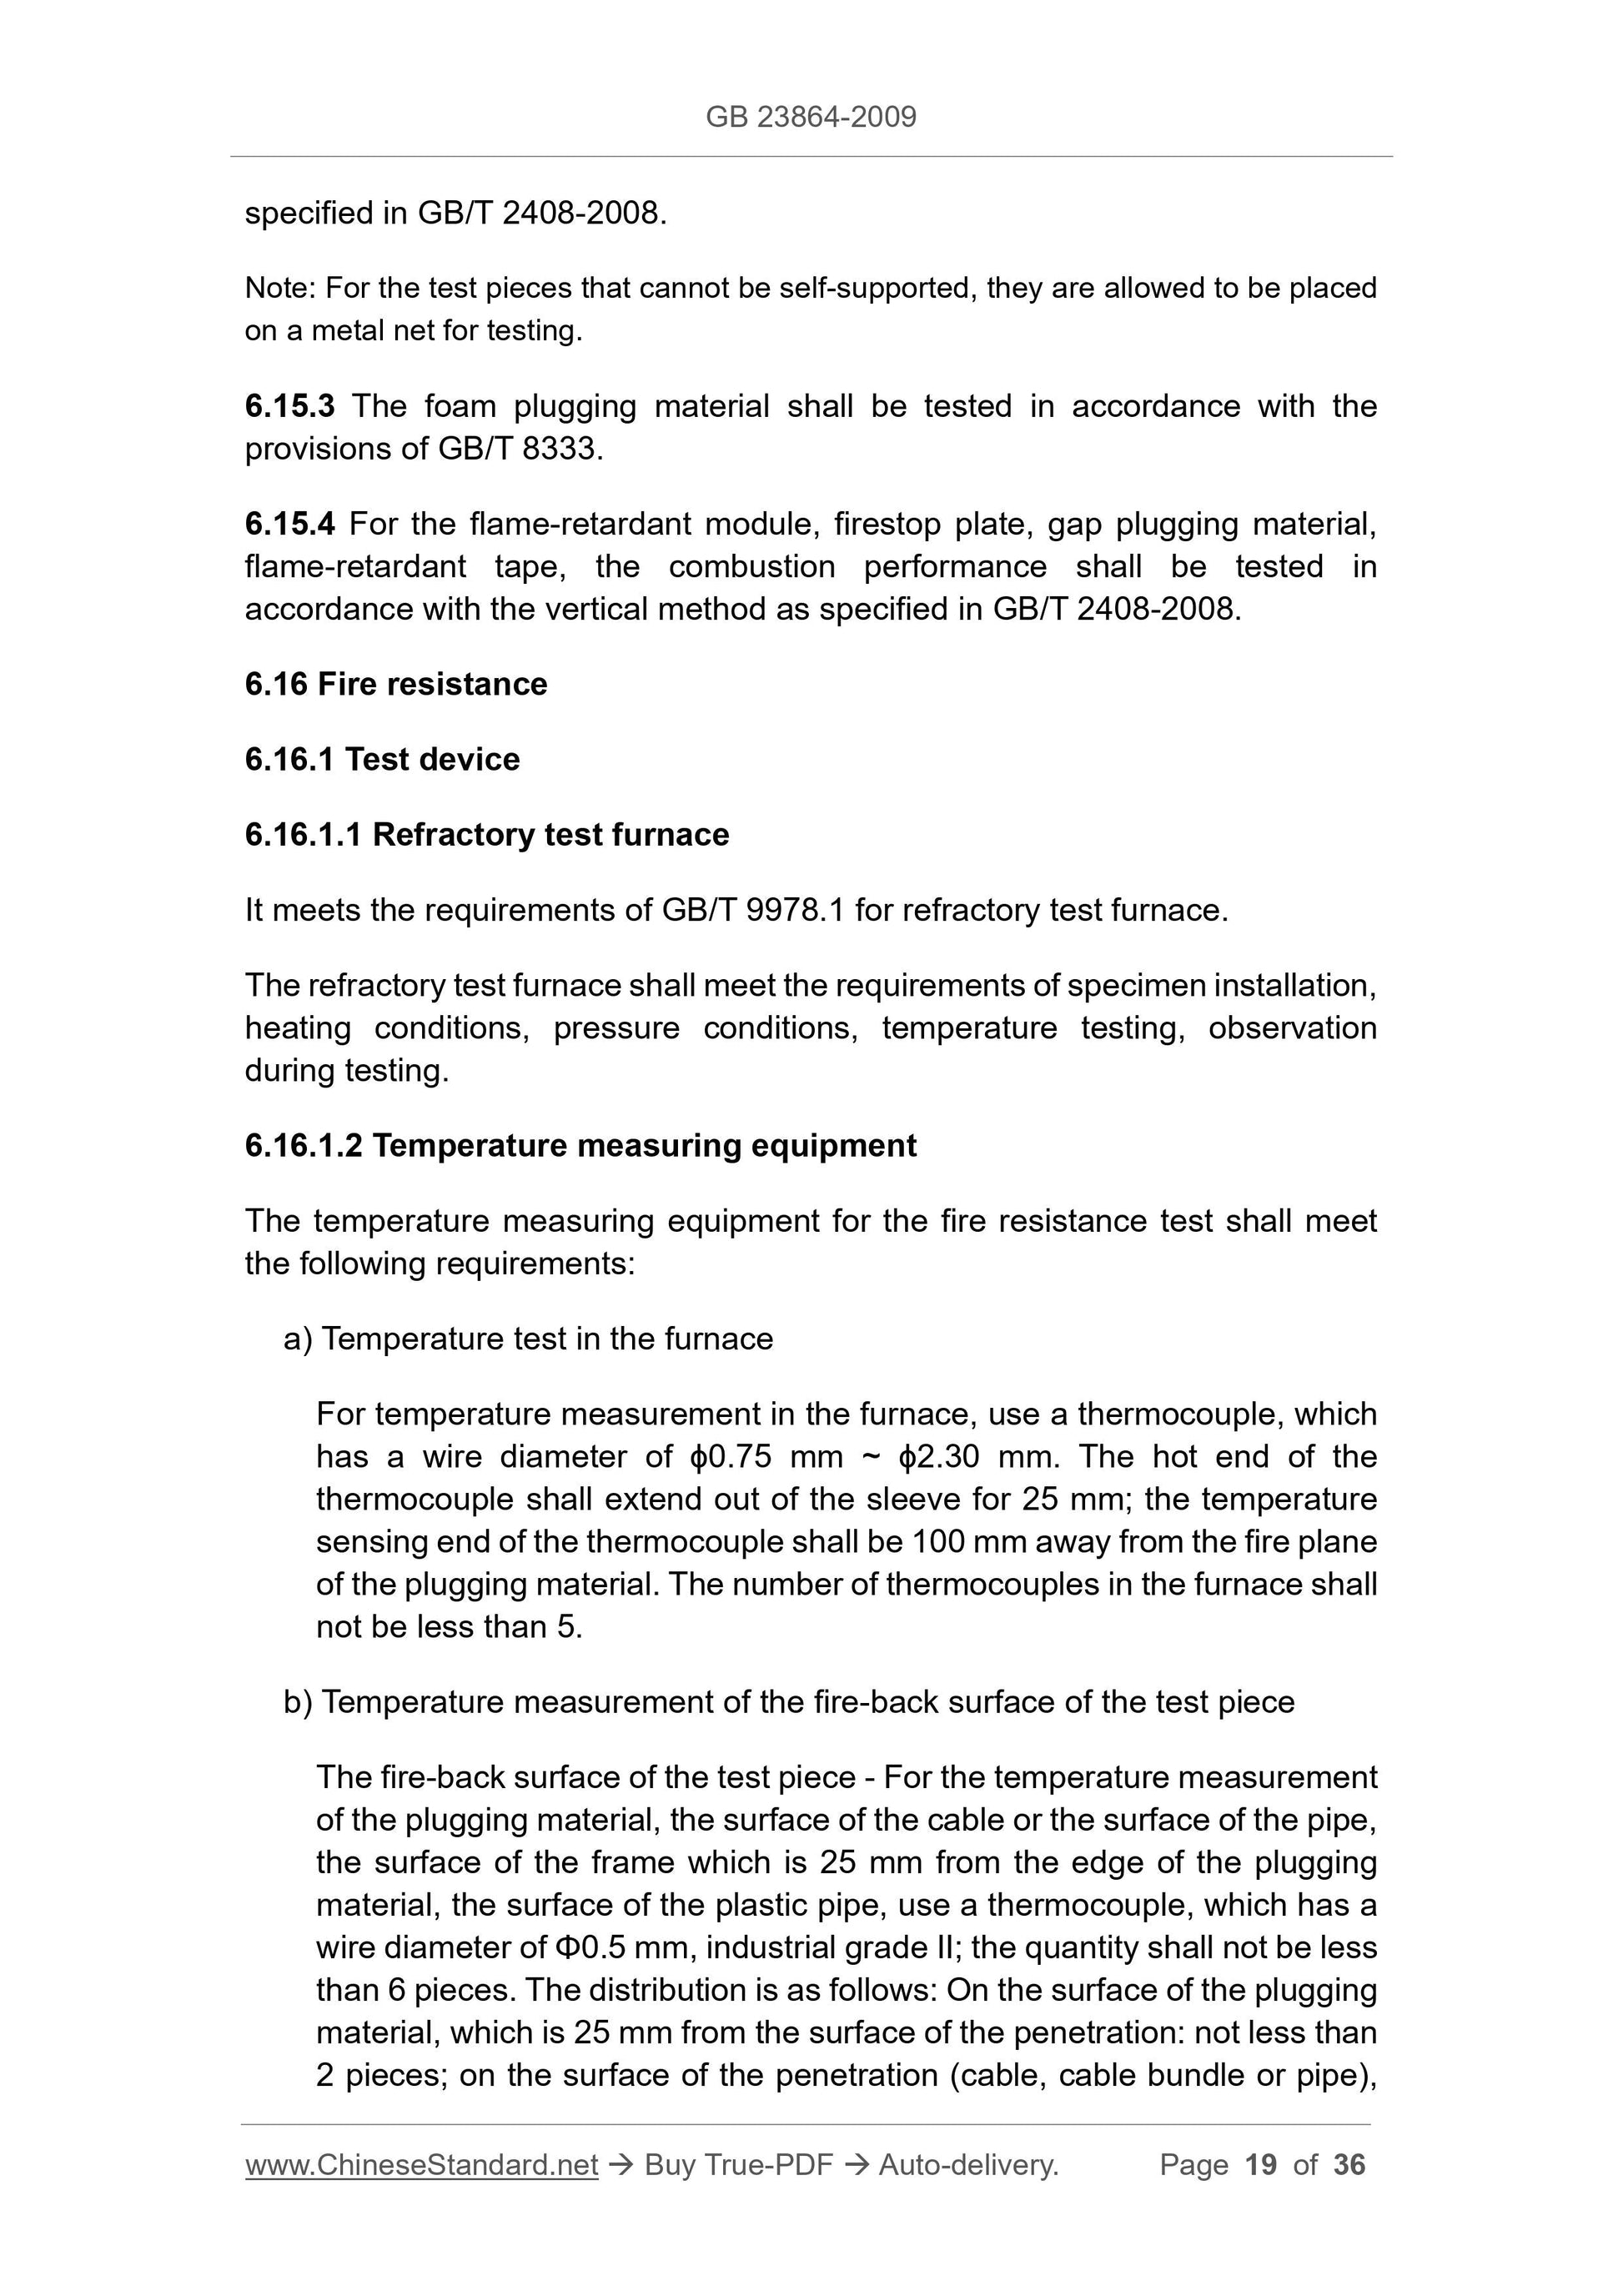 GB 23864-2009 Page 7